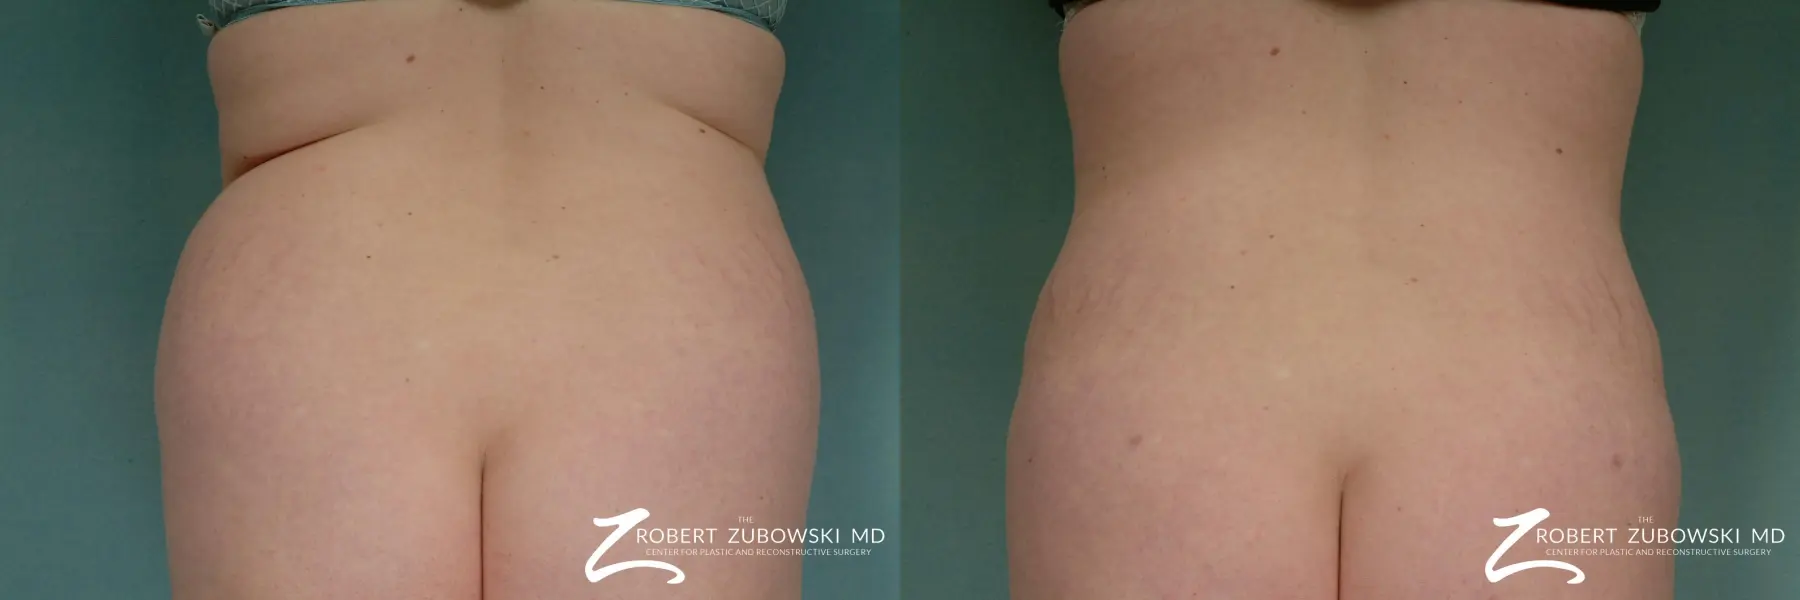 Liposuction of flanks  Care Well Medical Centre